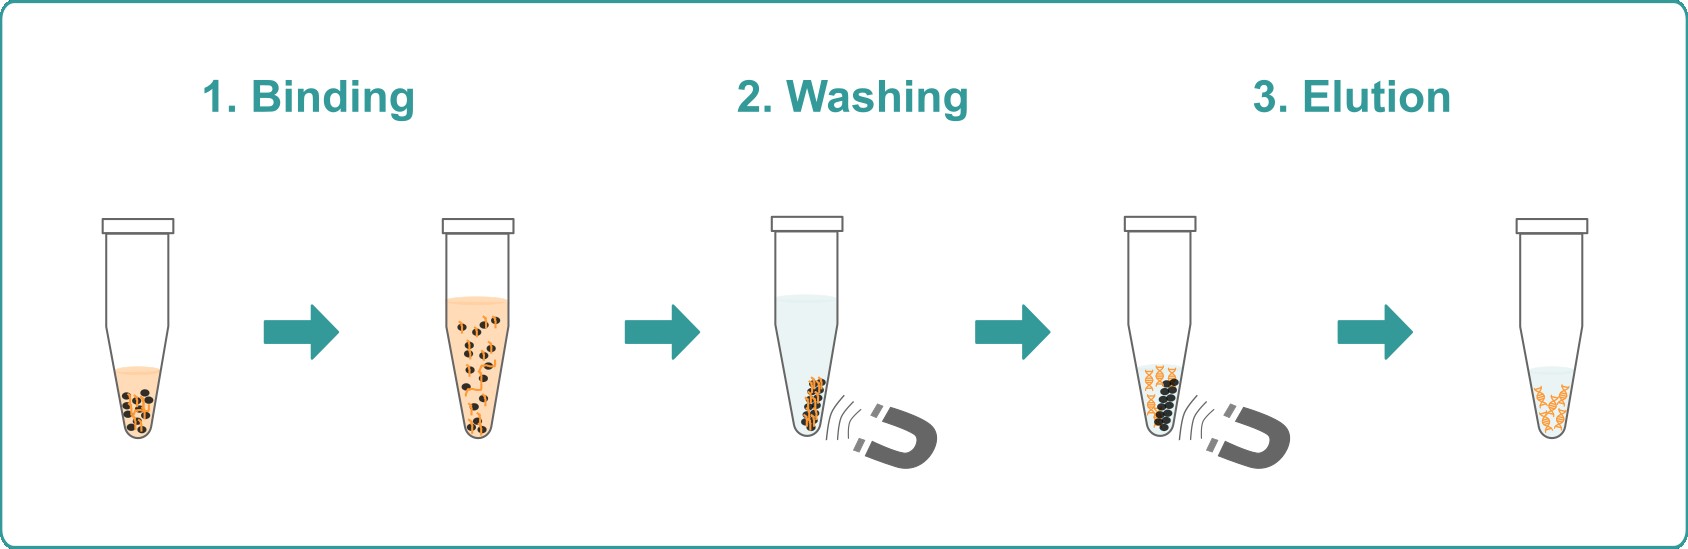 Graphical representation of the three steps – binding, washing and elution – of the total DNA clean-up workflow.